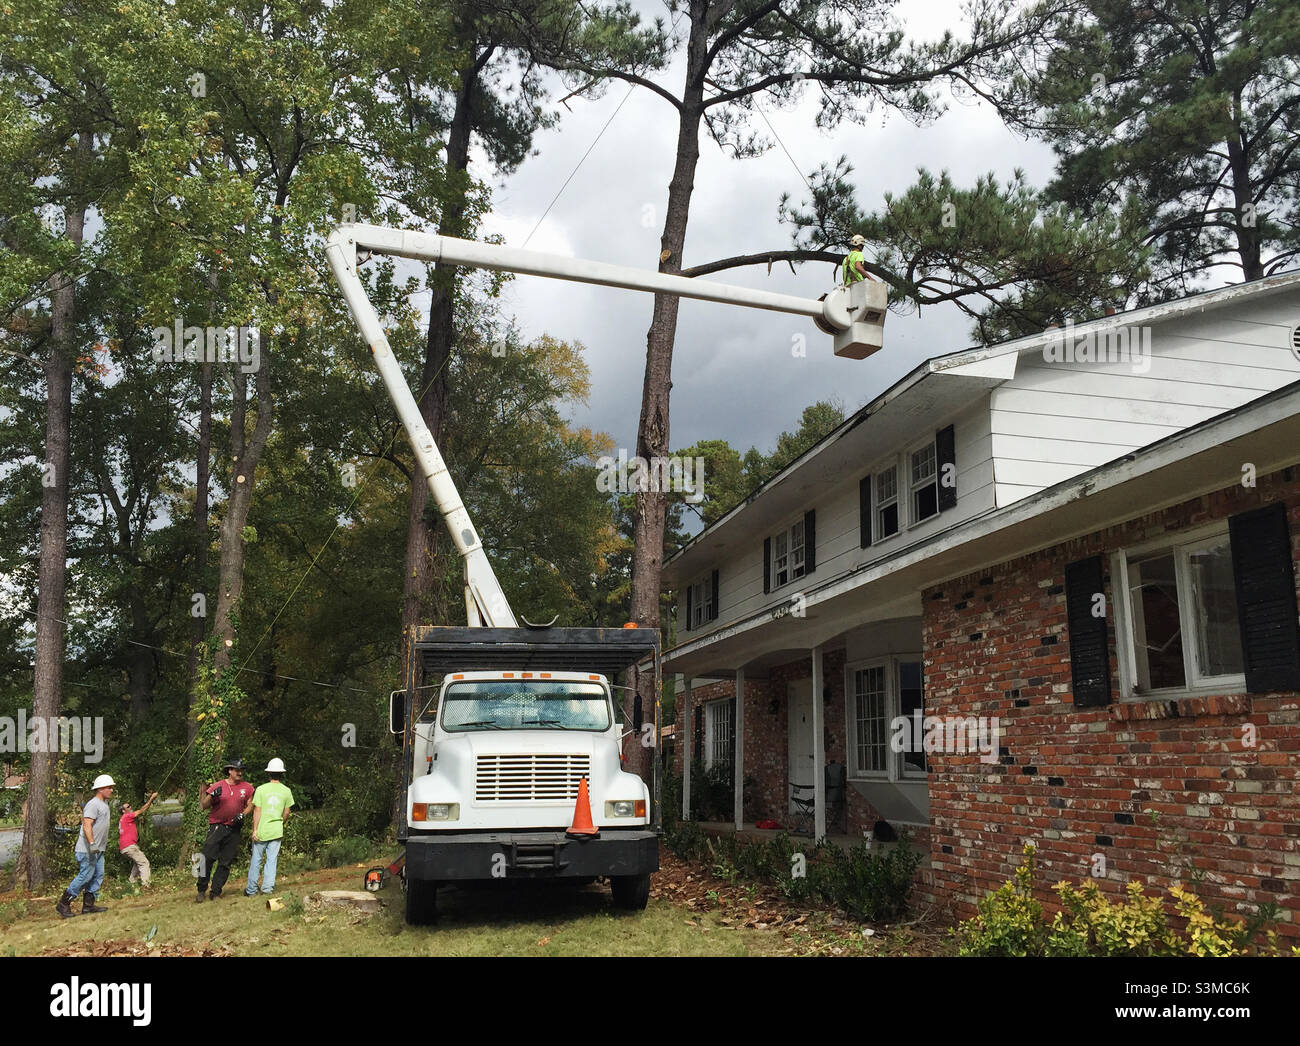 Tree removal at a residential property. Stock Photo